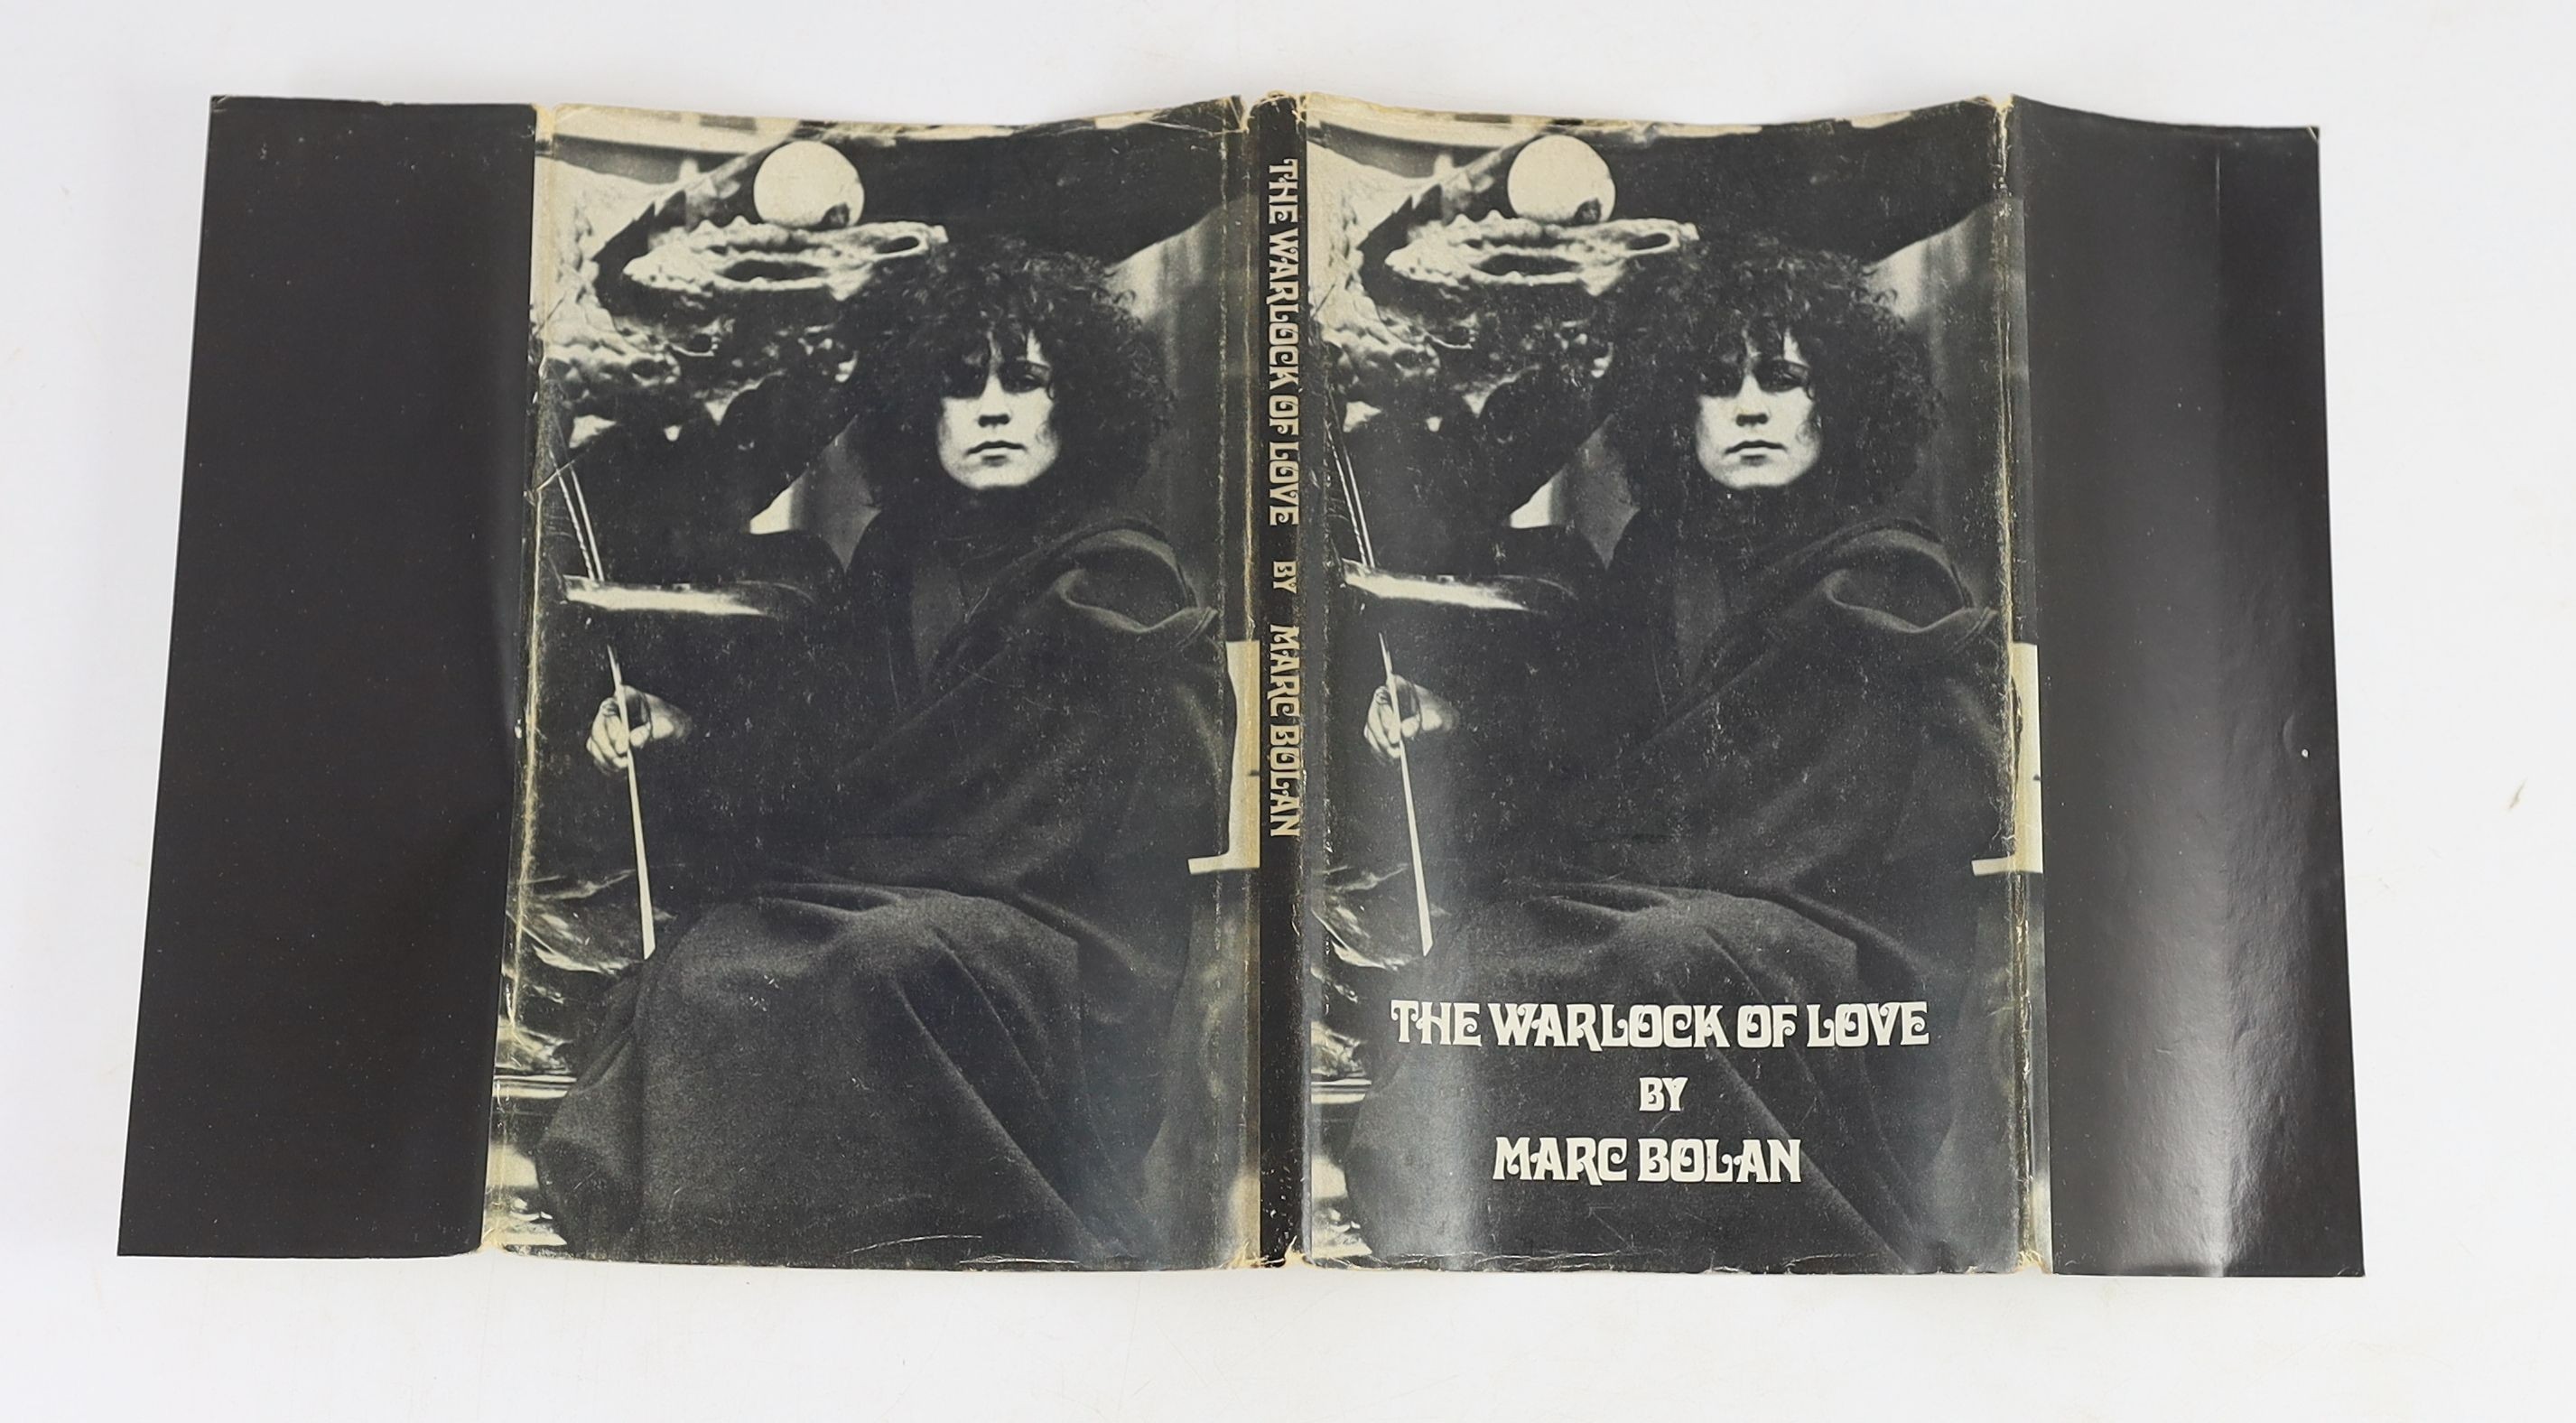 Bolan, Marc - The Warlock of Love. 1st ed. Original pictorial printed boards with unclipped d/j. 8vo. Lupus Music, Plymouth, 1969.